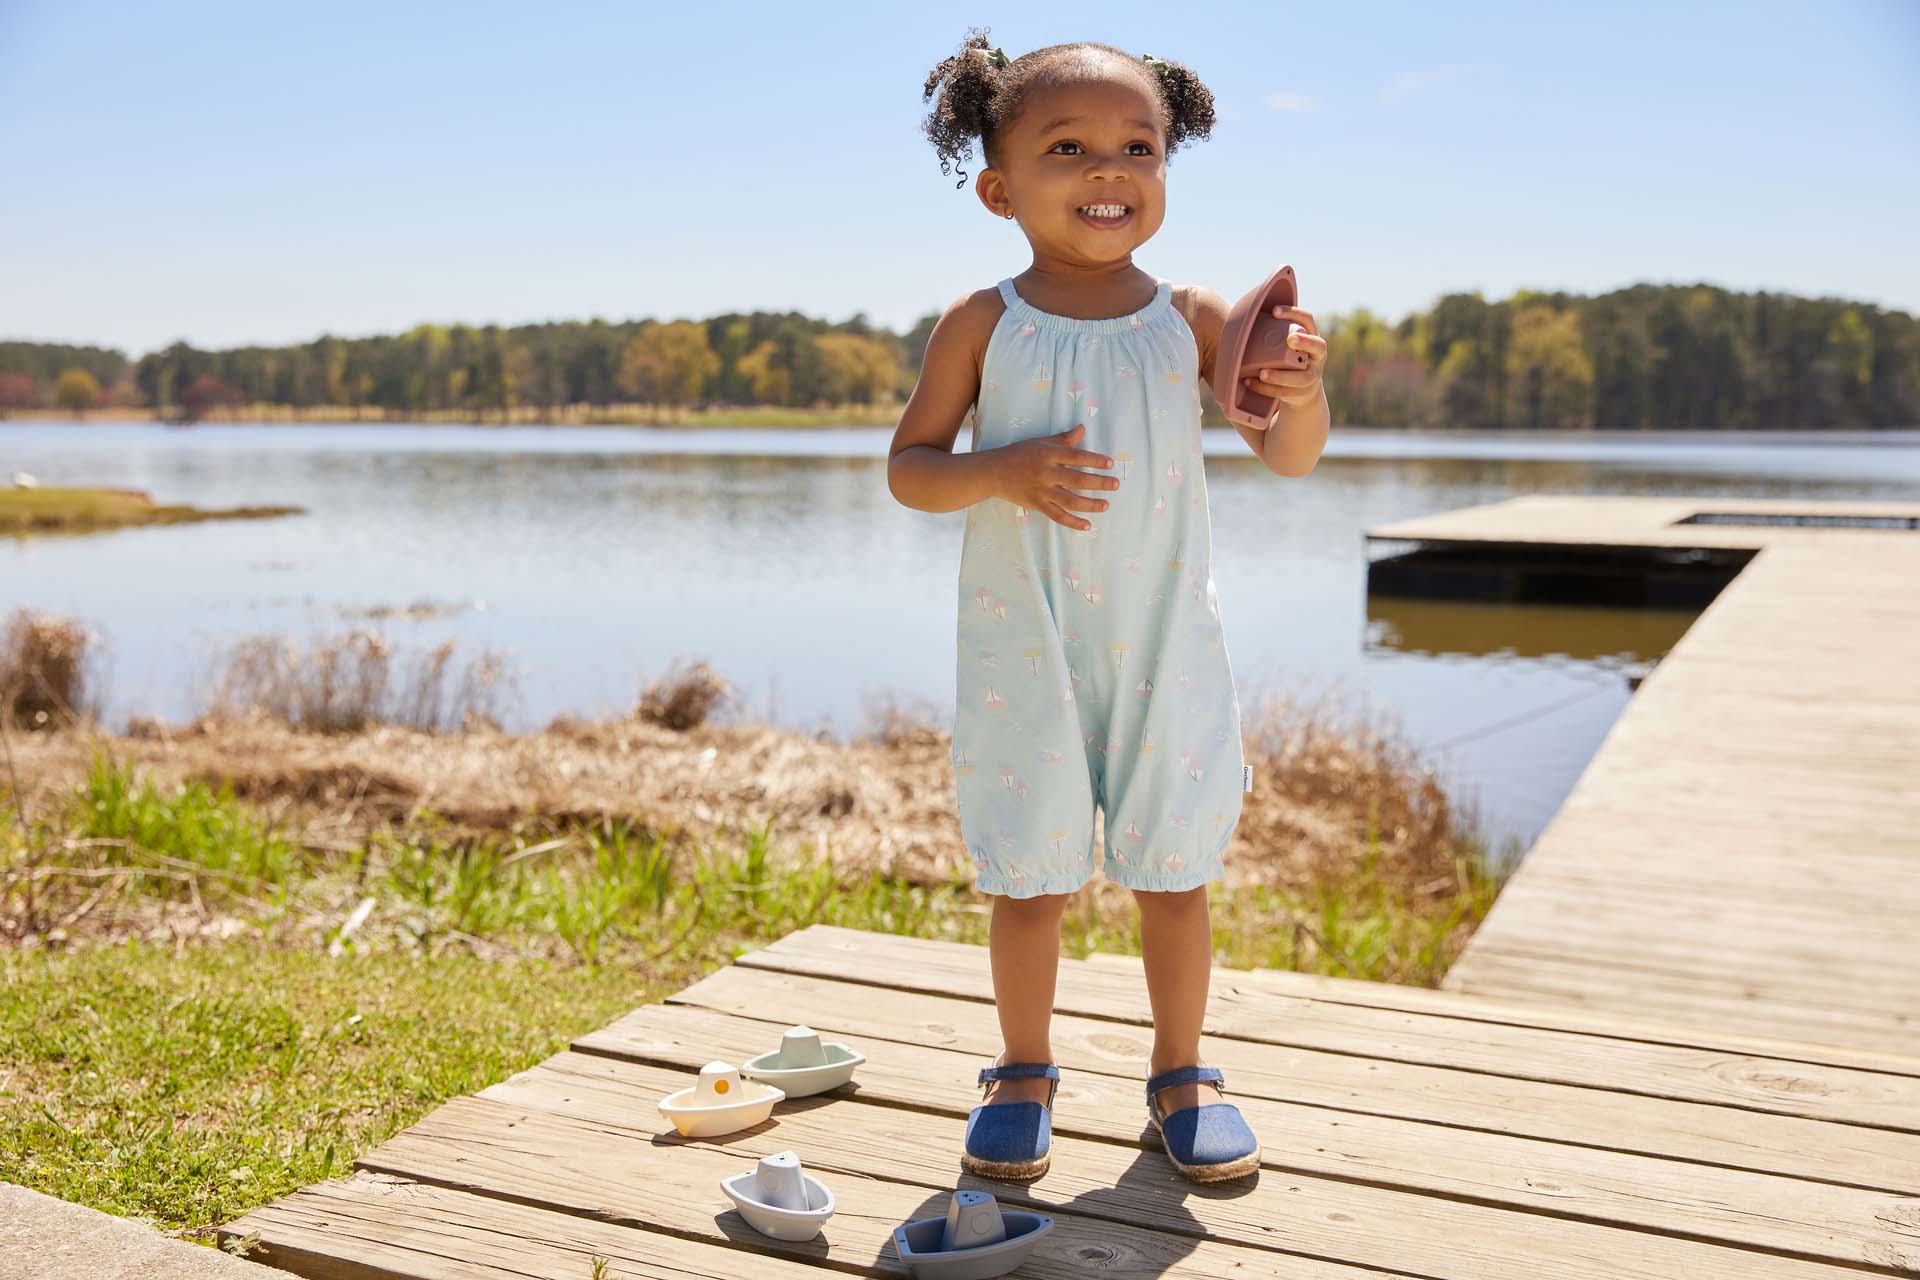 A toddler girl in a blue outfit smiles and points, standing on a wooden dock by a lake with toys nearby, on a sunny day.